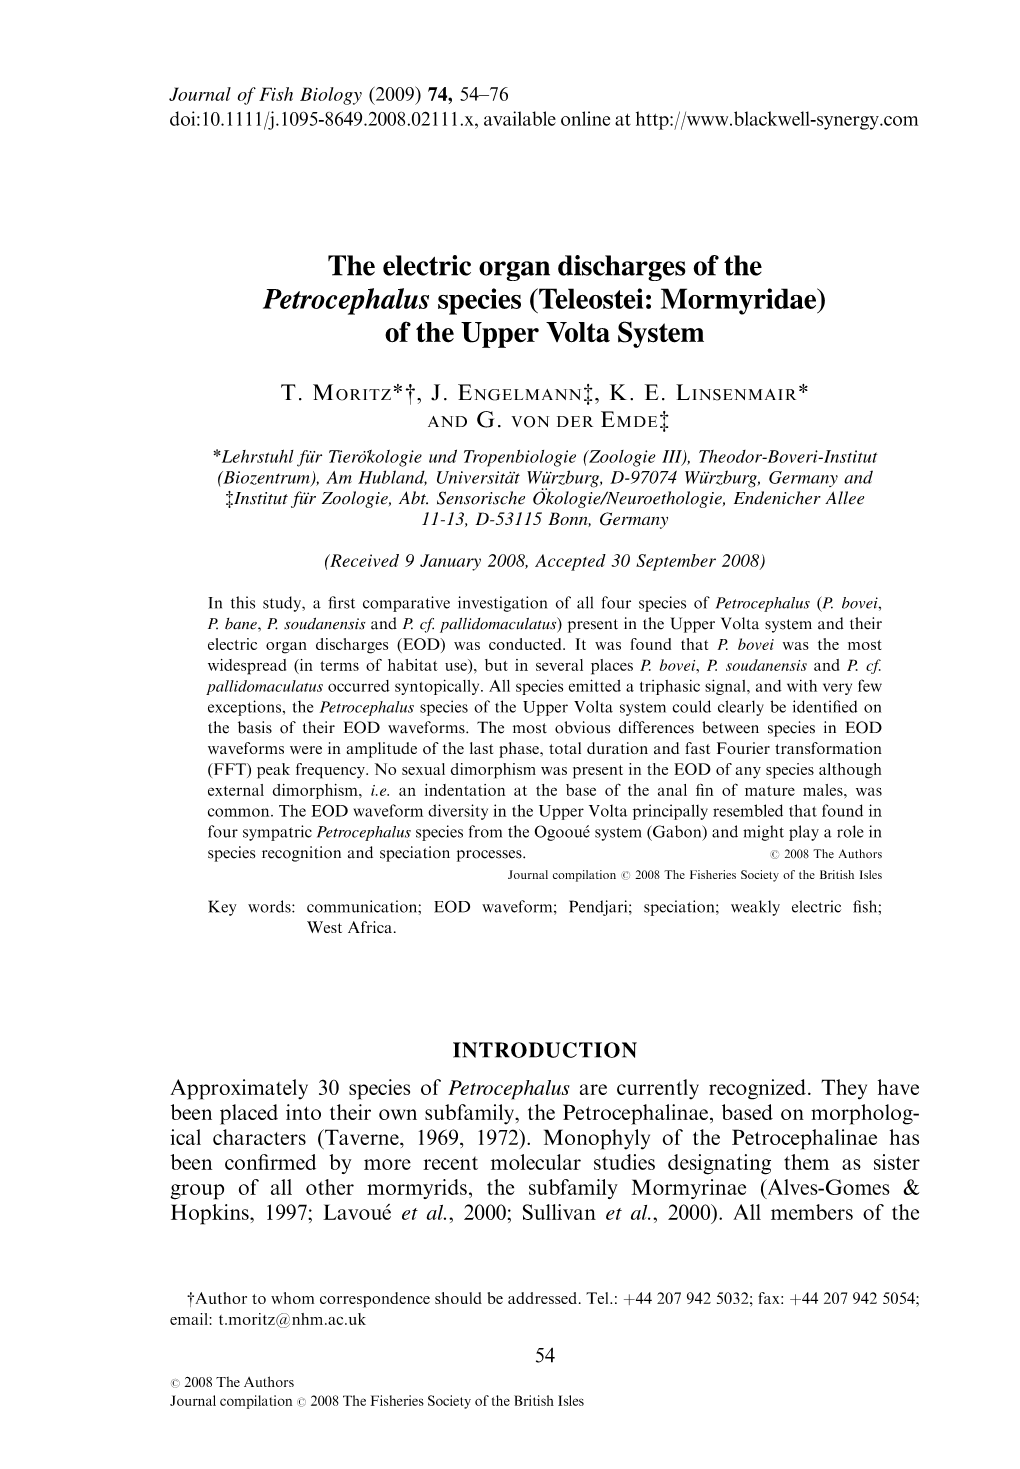 The Electric Organ Discharges of the Petrocephalus Species (Teleostei: Mormyridae) of the Upper Volta System